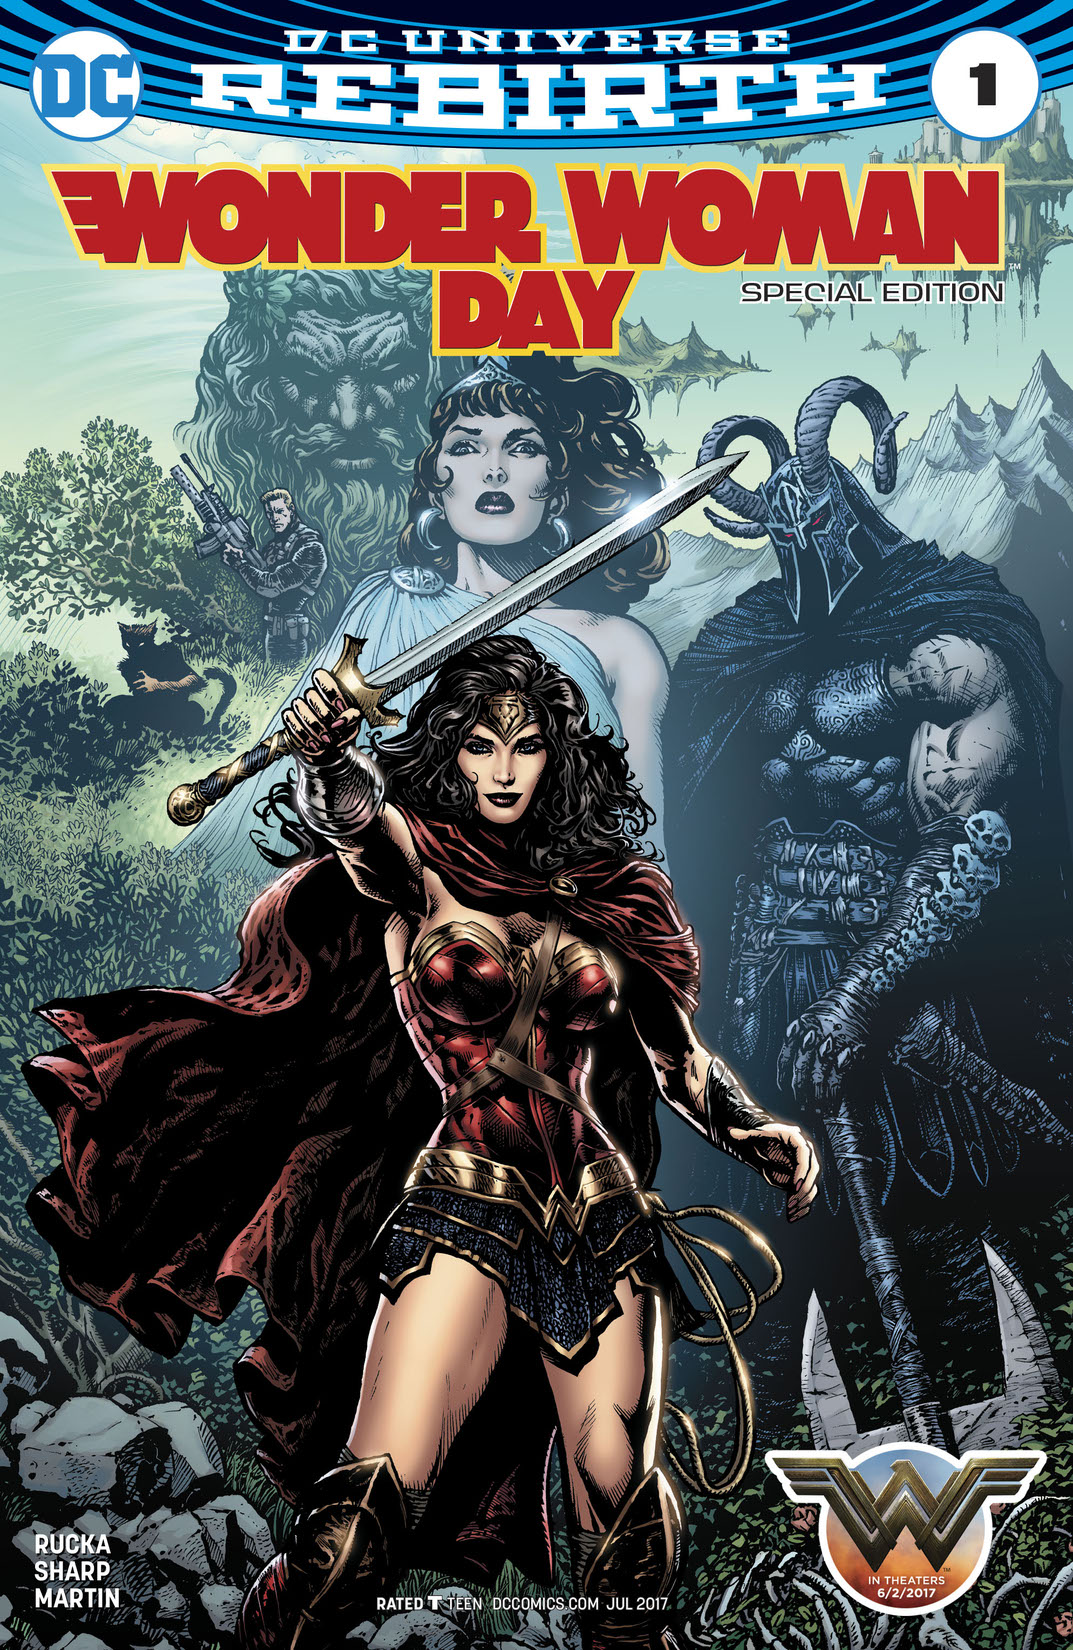 Wonder Woman #1 Wonder Woman Day Special Edition (2017-) #1 preview images